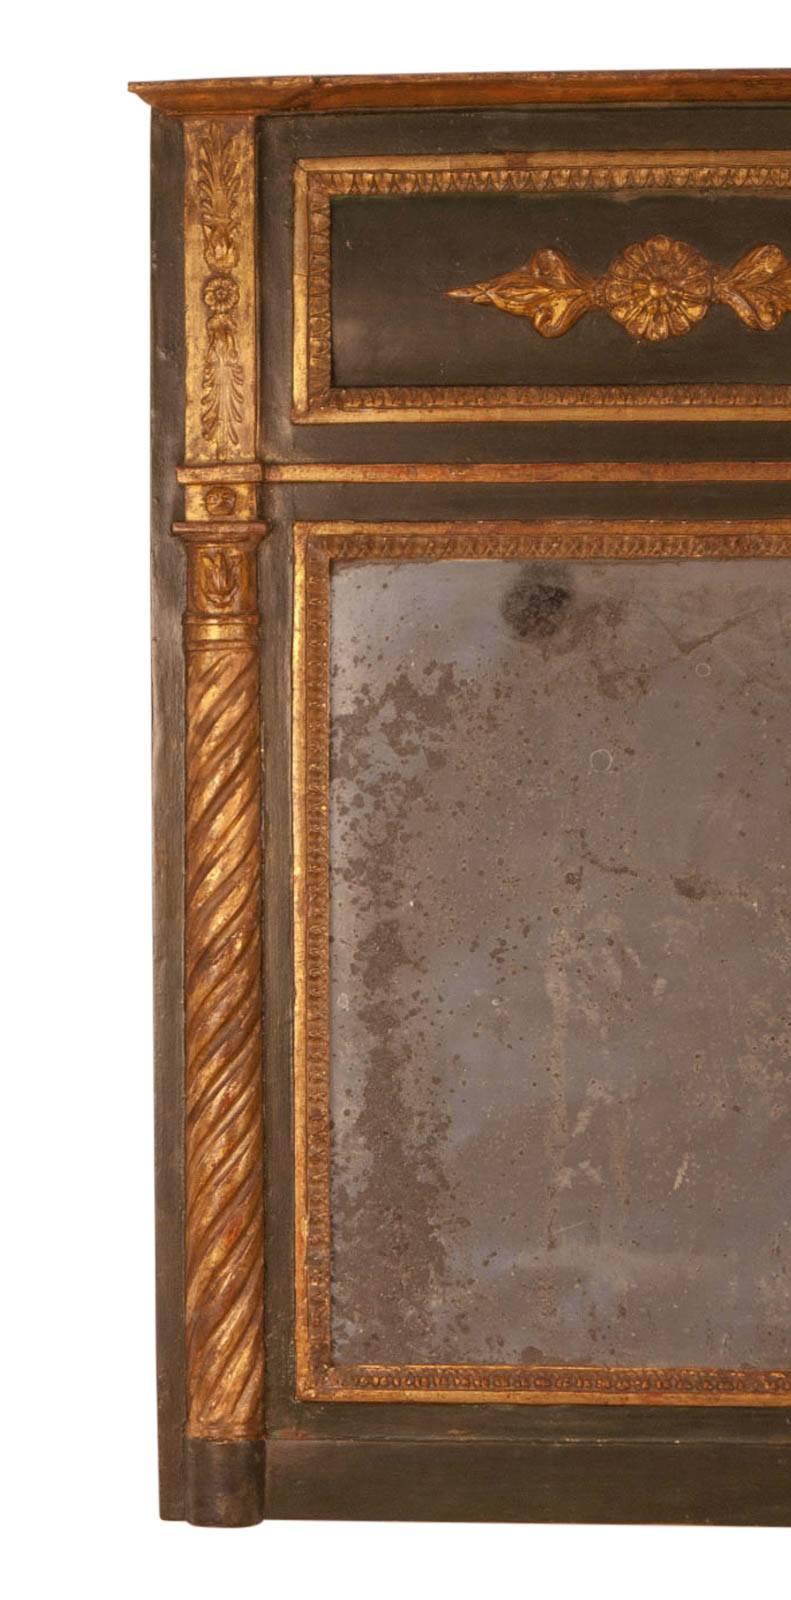 A French Empire painted and giltwood mirror, circa 1830. The paint is a dark bottle green.